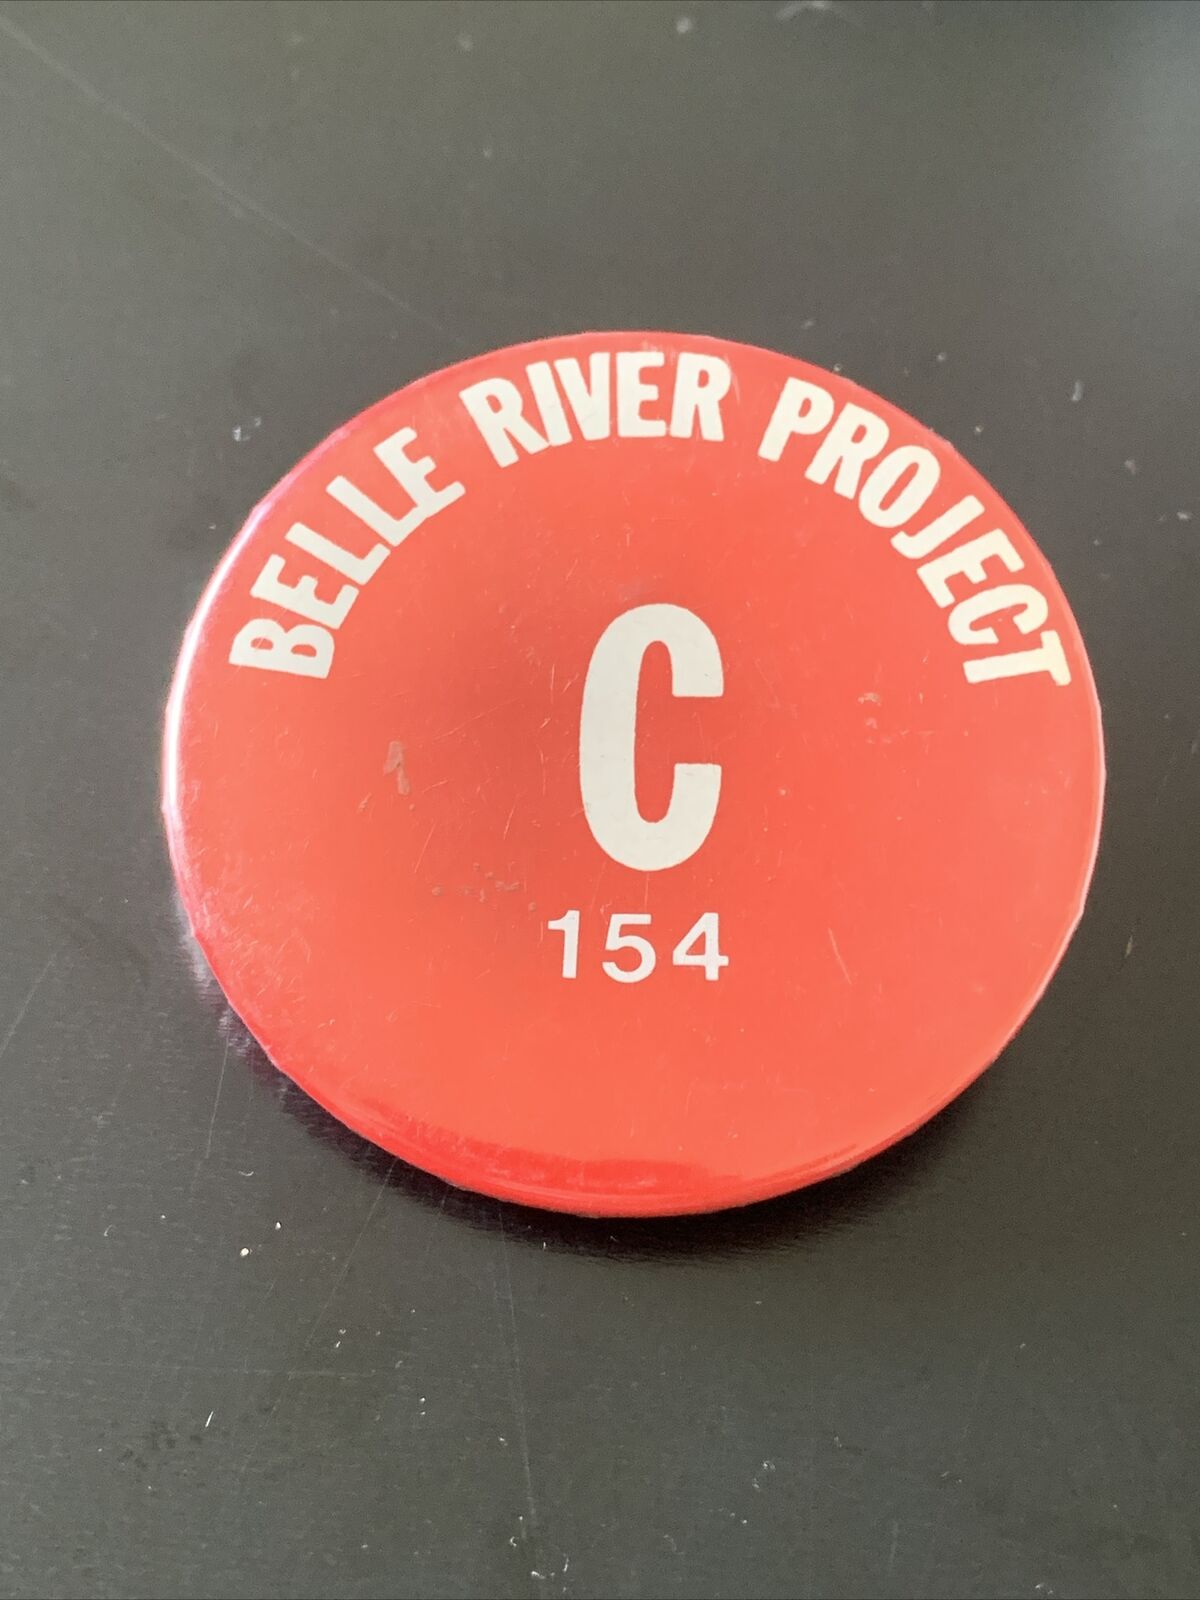 Vintage Belle River Project - Michigan Employee Badge Button St Clair County 